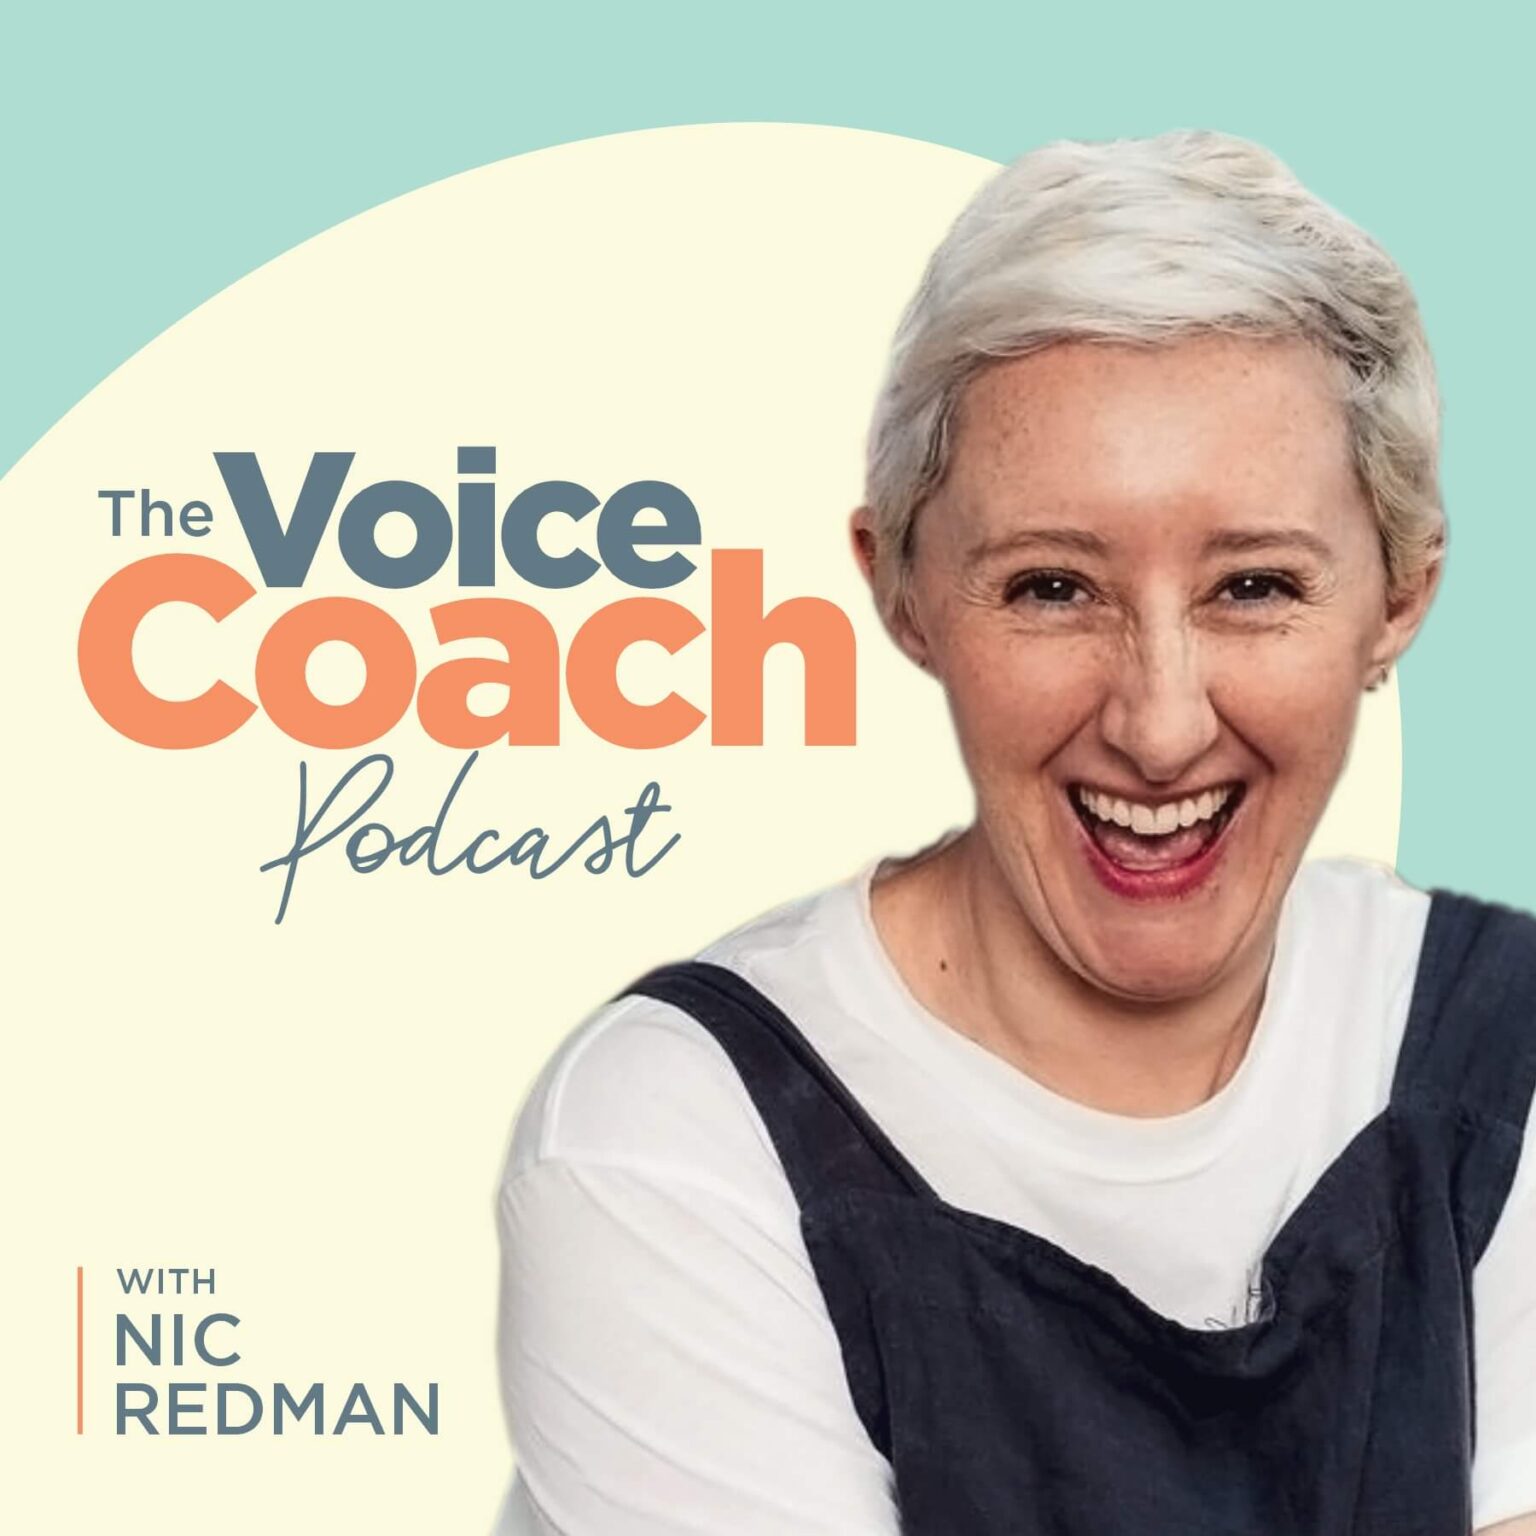 The Voice Coach Podcast Nic Redman